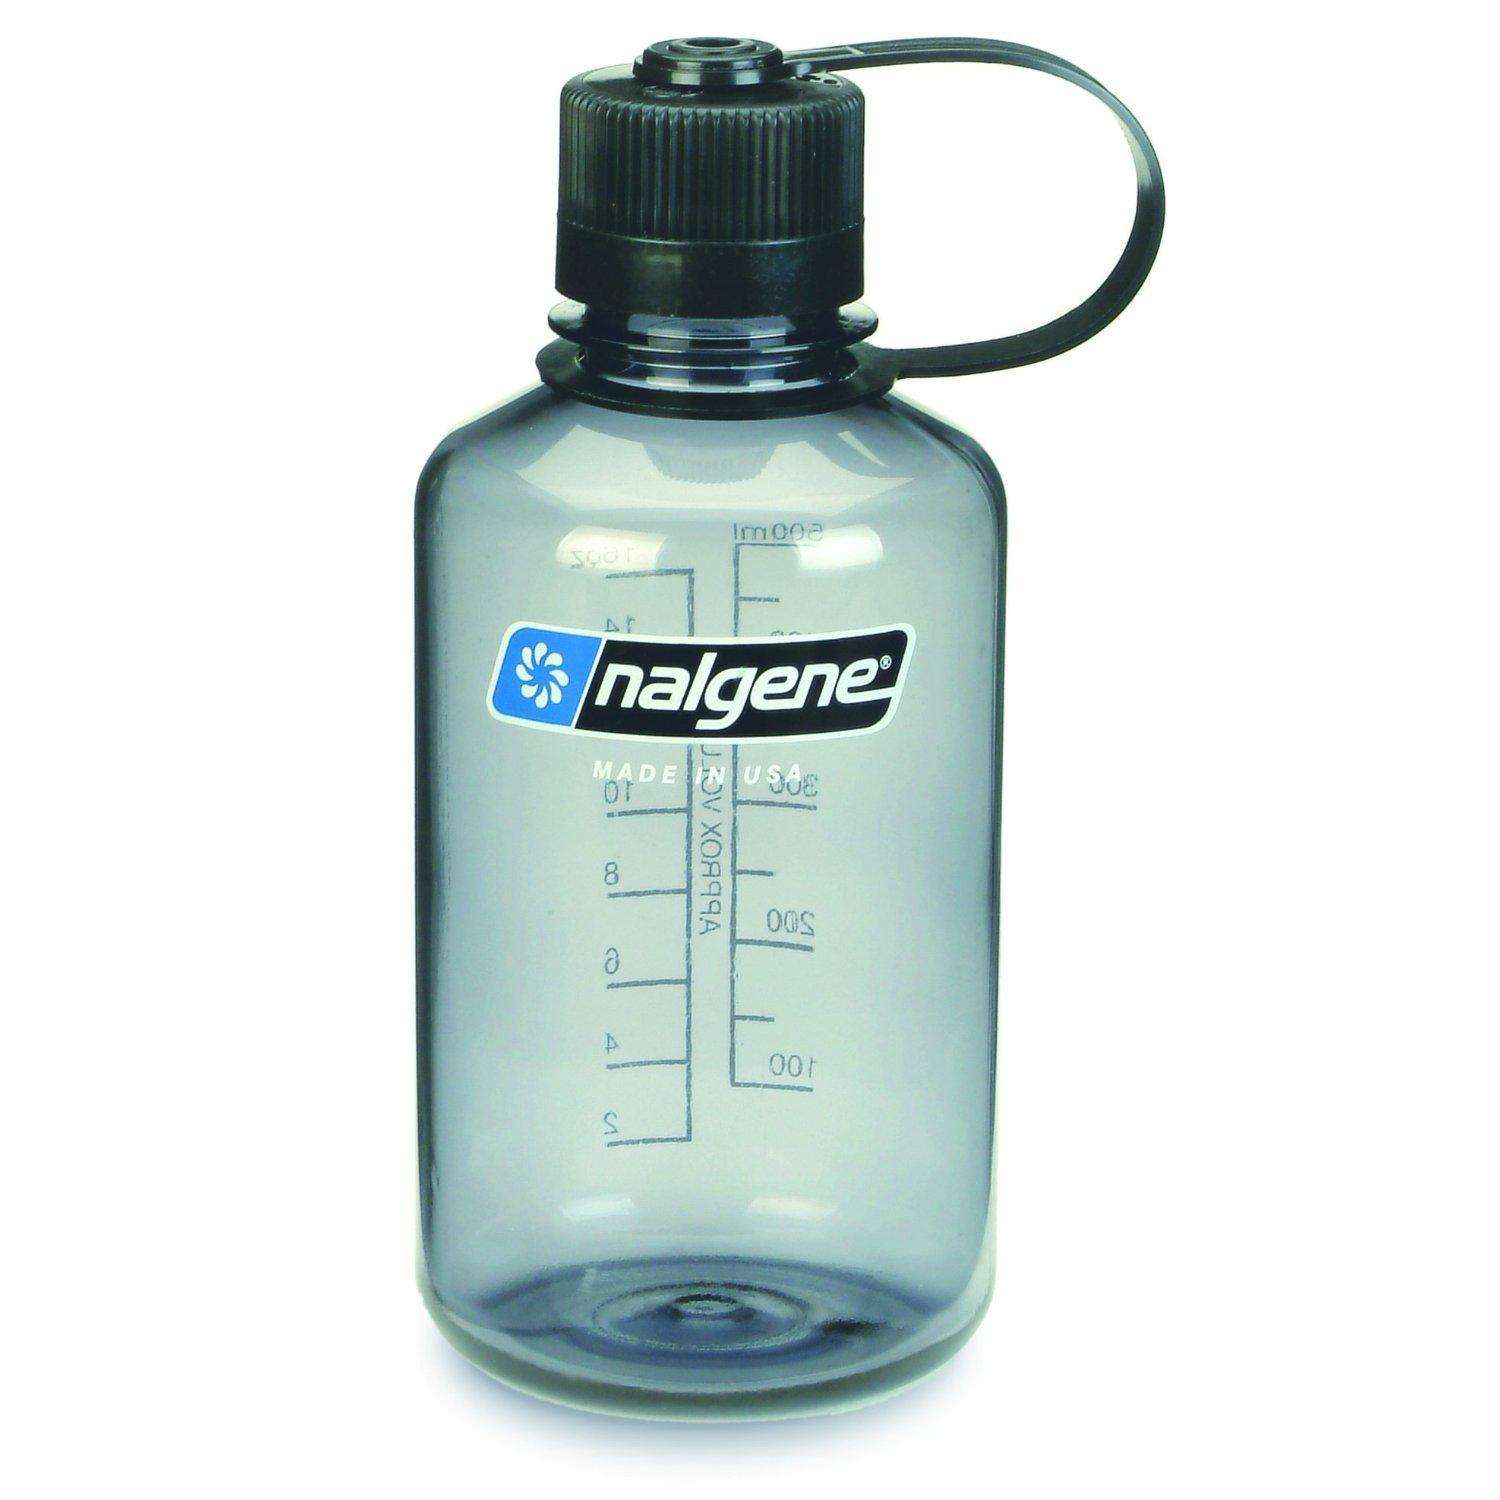 Nalgene Narrow Mouth Water Bottle 1 Pint Gray With Black Lid for sale online 